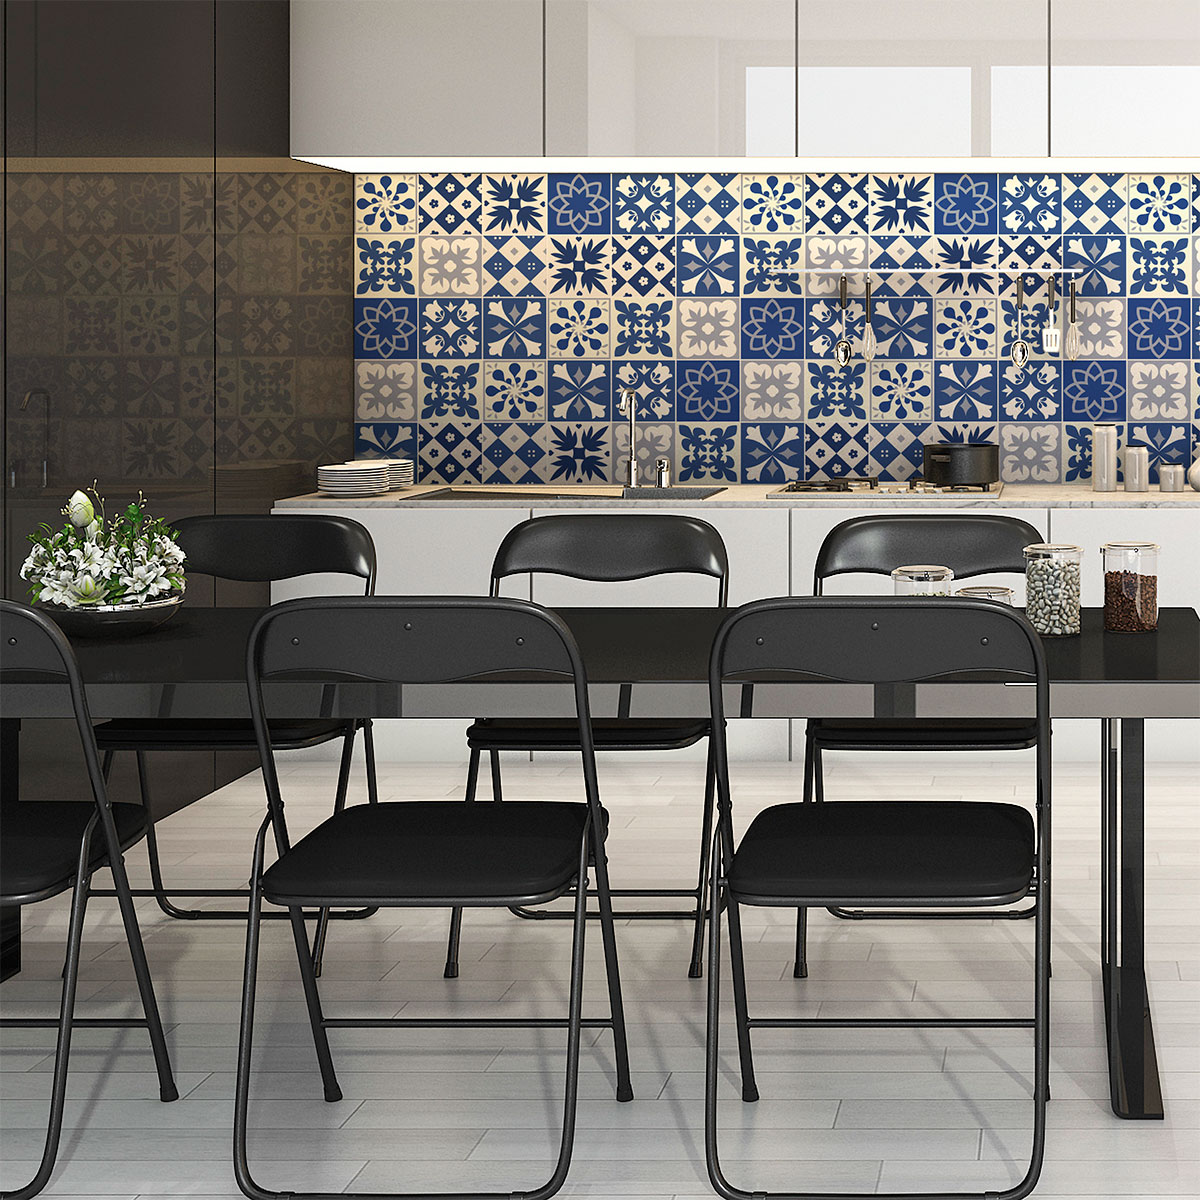 30 wall stickers cement tiles azulejos cindia